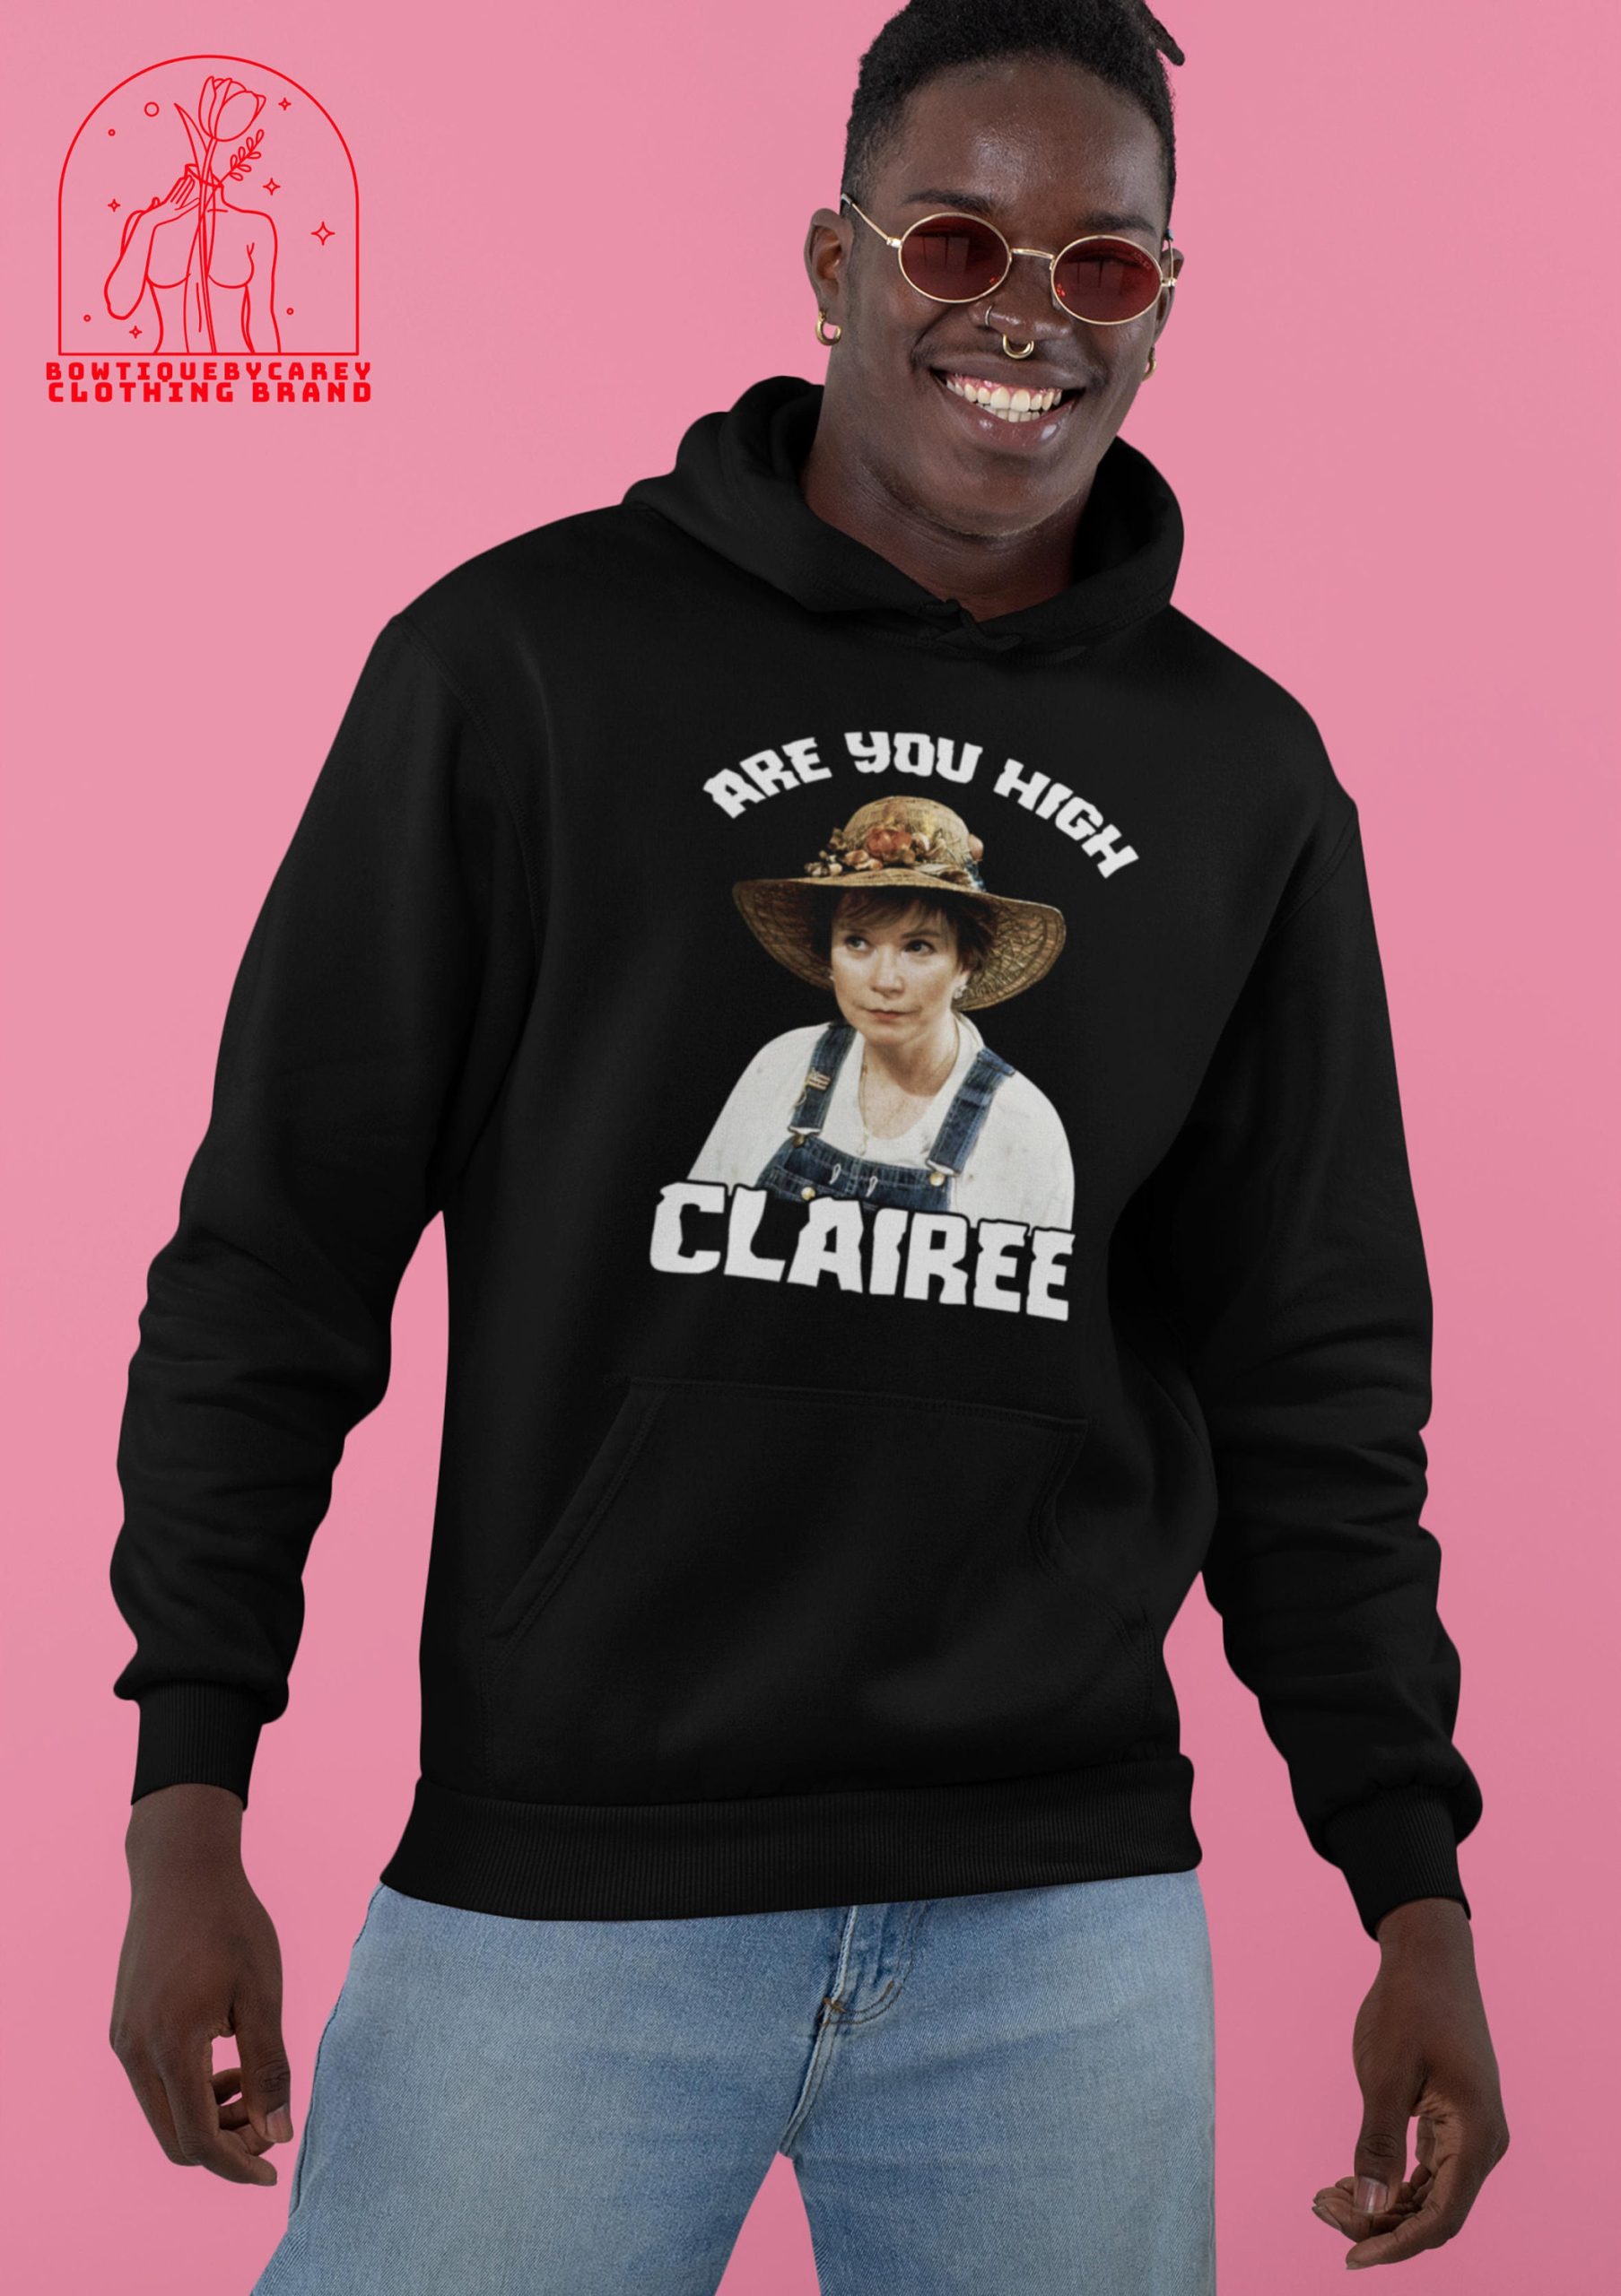 Are You High Clairee Sl Magnolias Comedy Movie 80s Movie Unisex T-Shirt